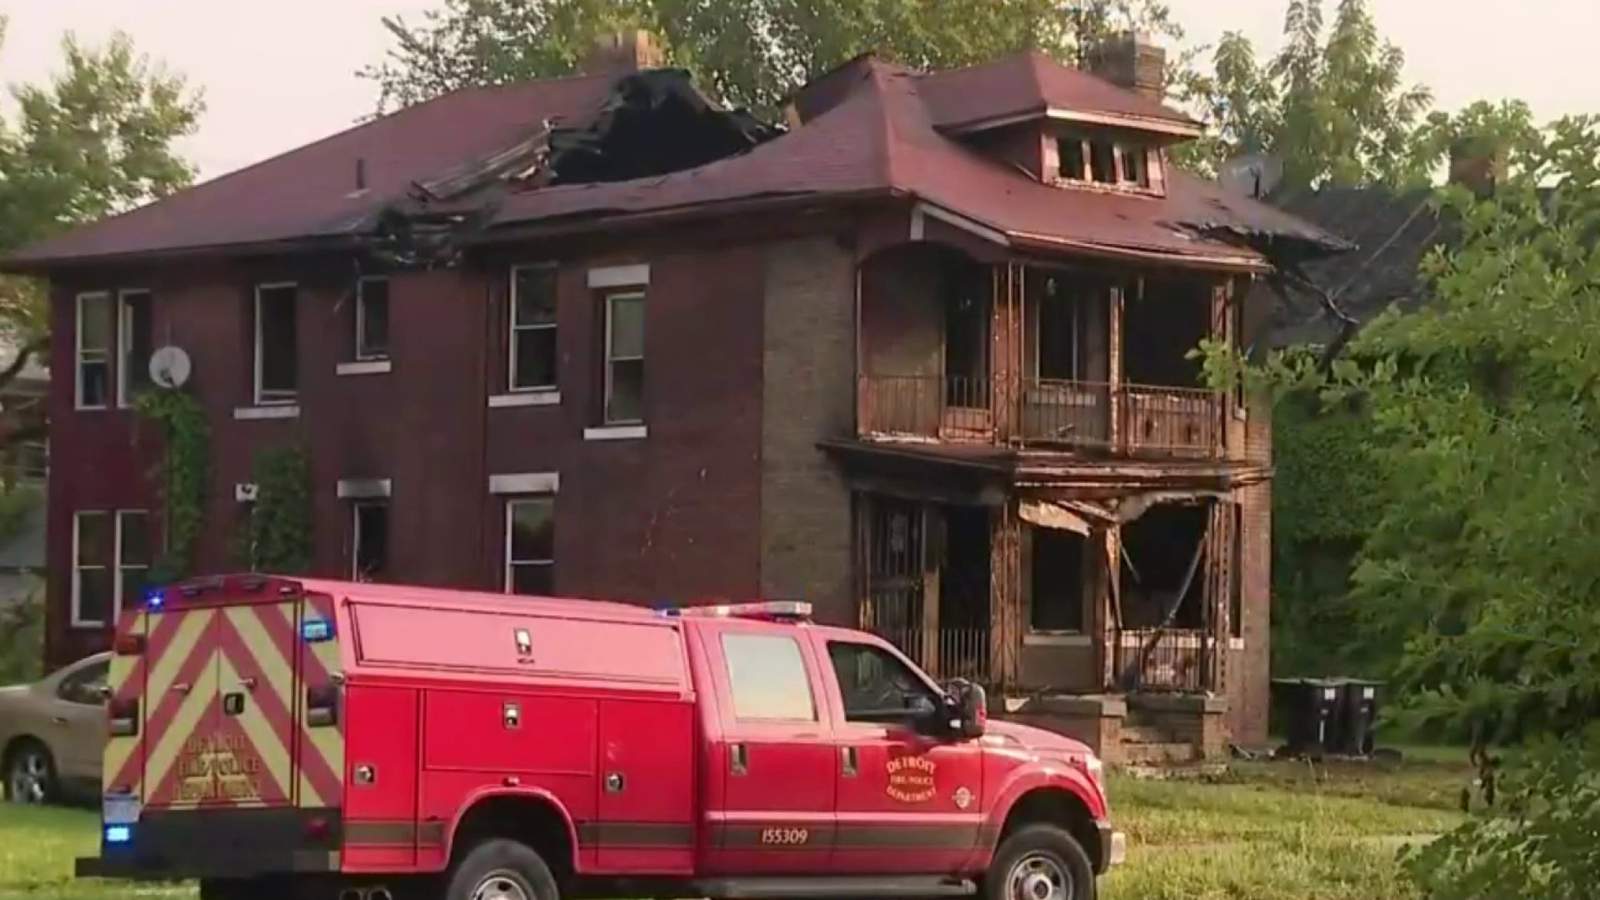 Medical examiner: 2 found dead in Detroit house fire suffered gunshot wounds